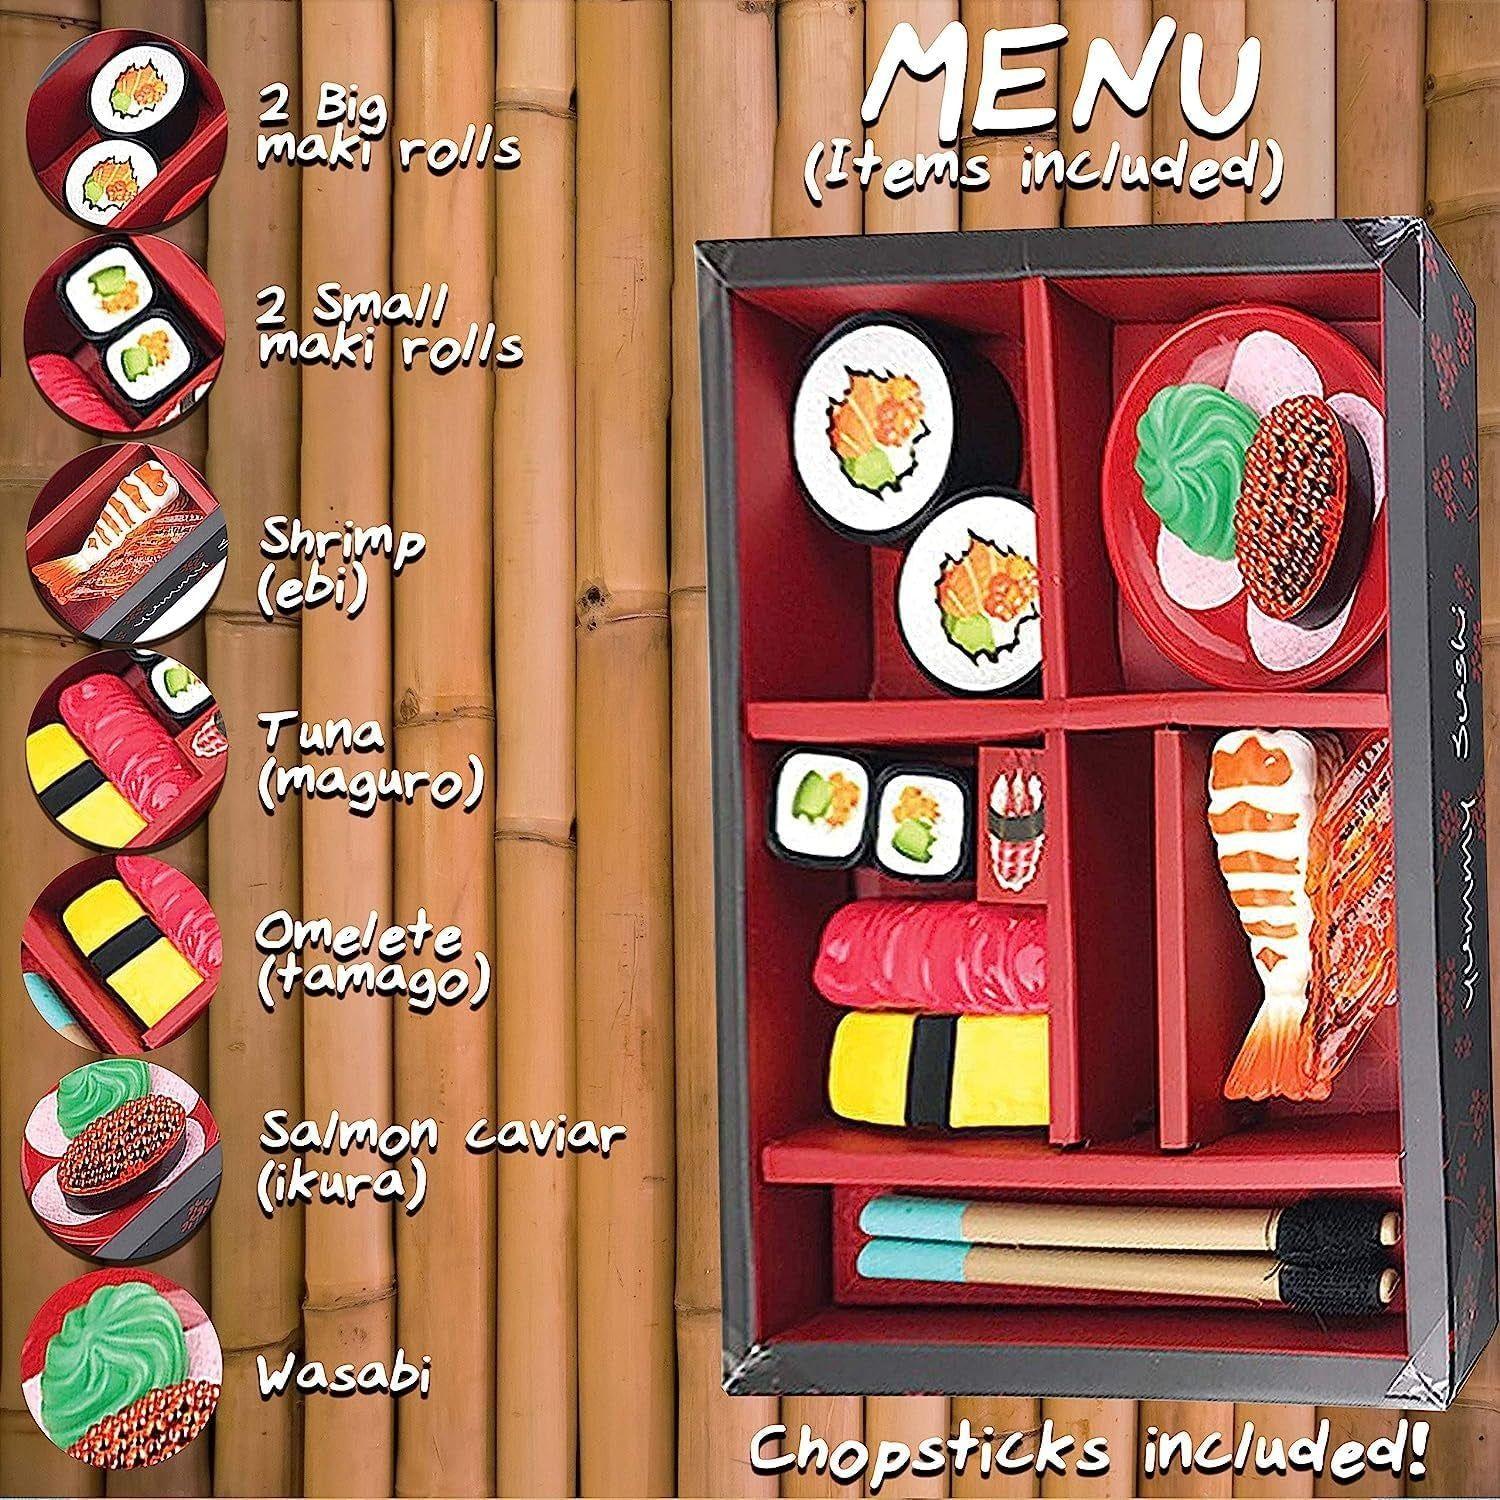 Authentic Japanese Sushi Bento Box Pretend Play Dinner Food Set - 19 Piece Cutting Food Toy Play Set for Kids